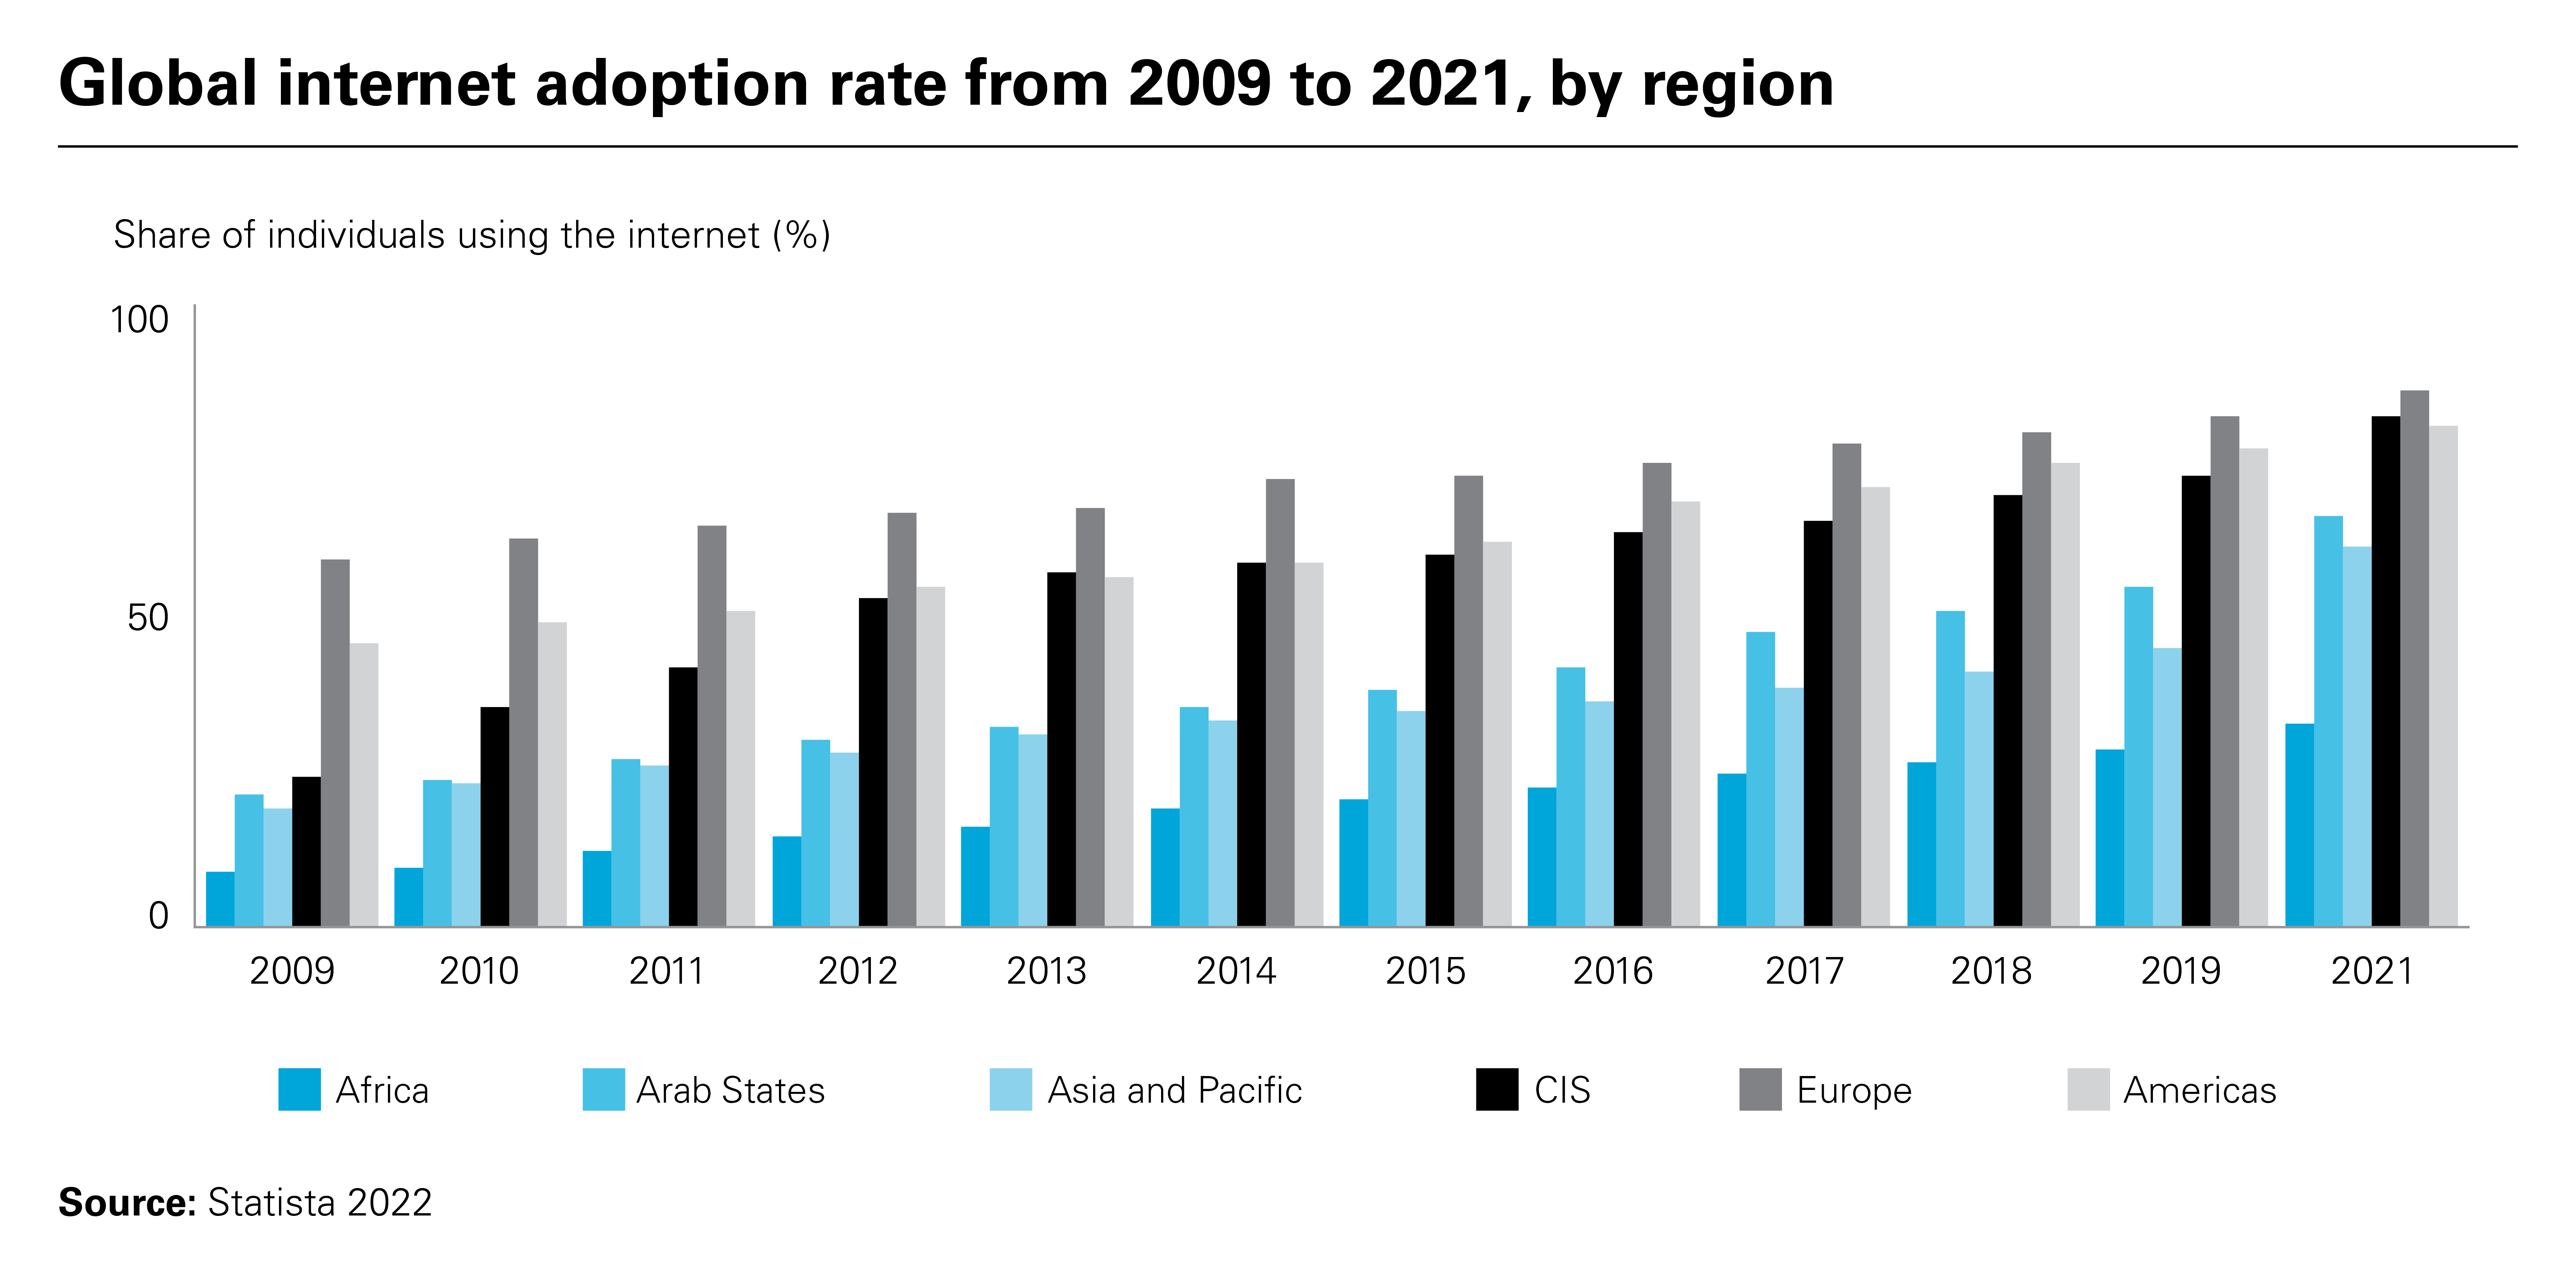 Global internet adoption rate from 2009 to 2021, by region